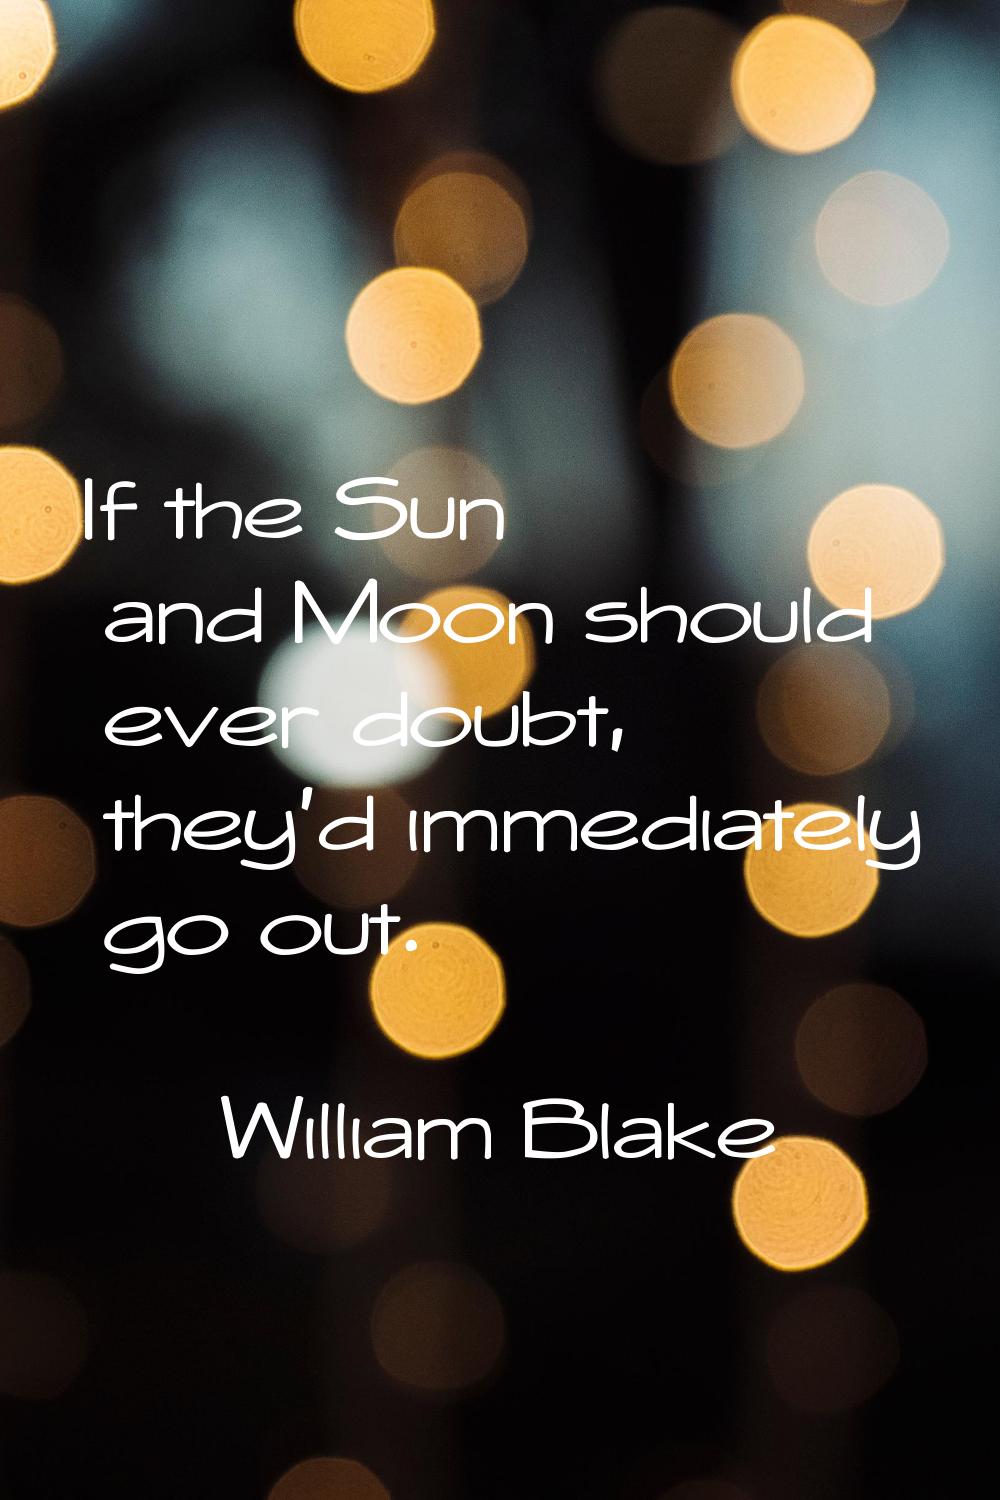 If the Sun and Moon should ever doubt, they'd immediately go out.